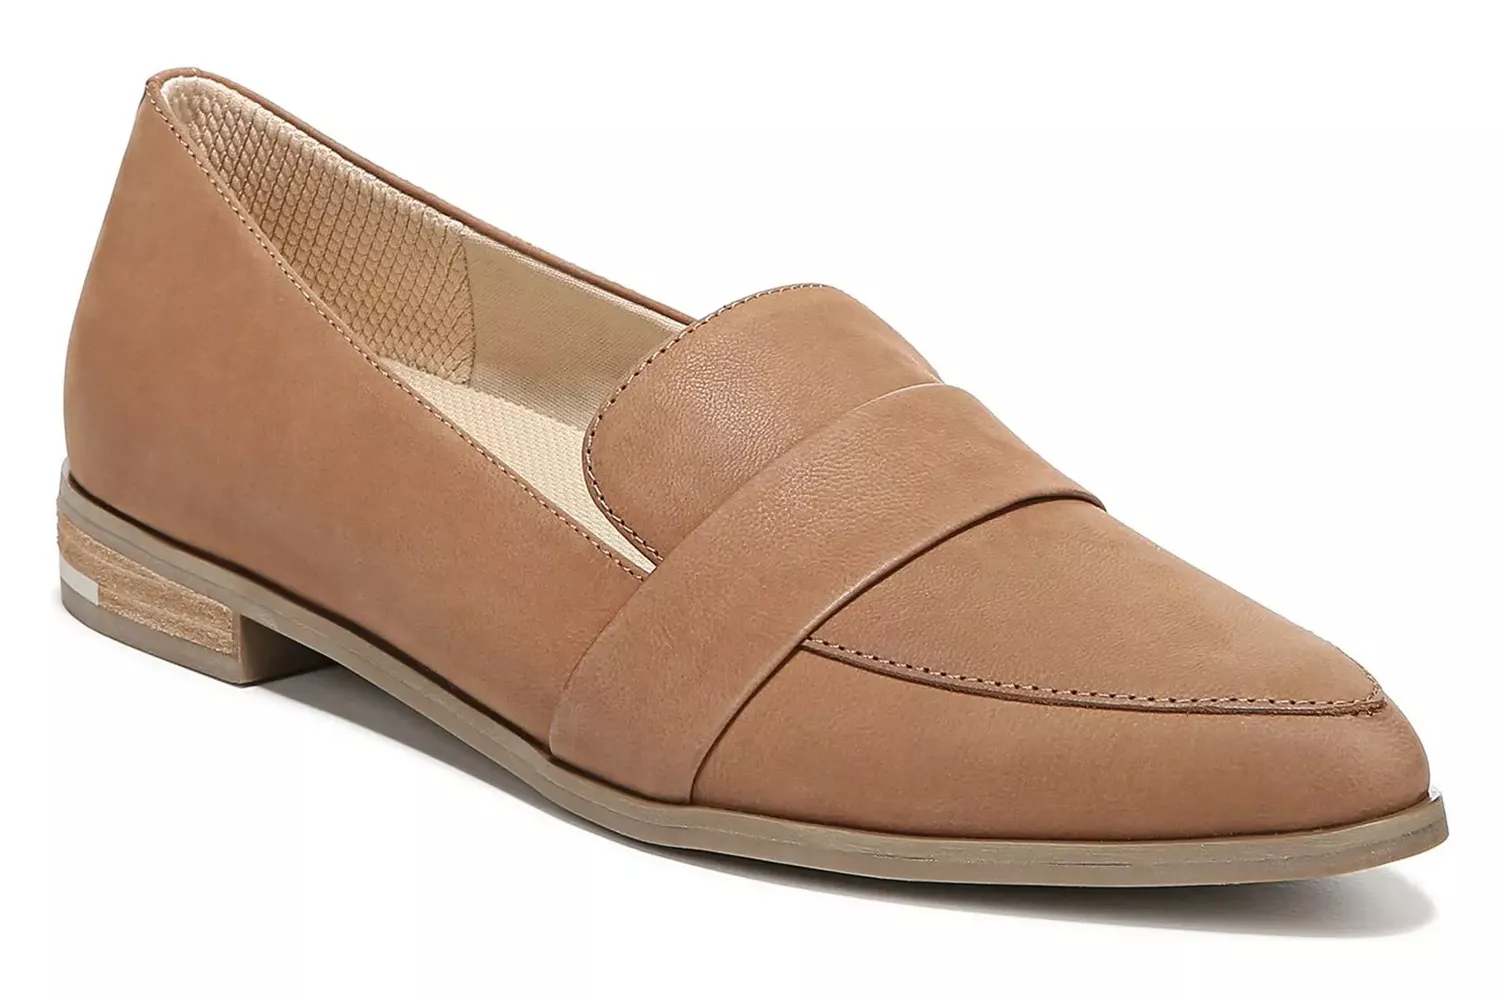 The Best Loafer Shoes: Dr. Scholl’s Faxon Loafer